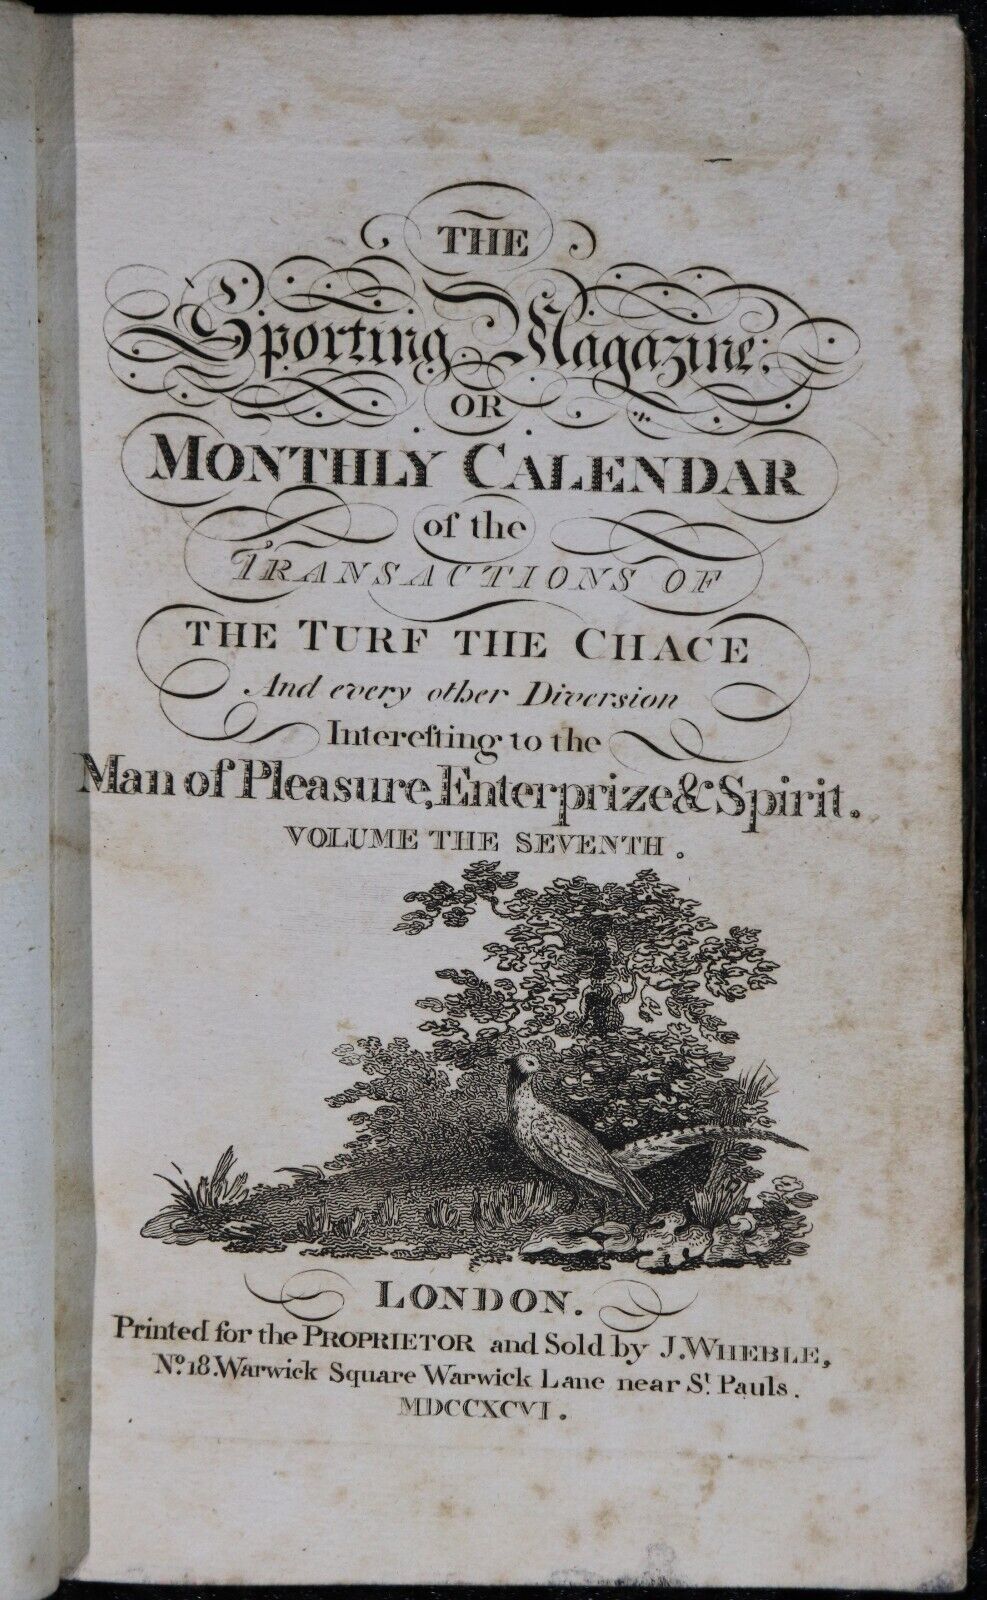 The Sporting Magazine: Monthly Calendar - 1796 - Antiquarian Sport History Book